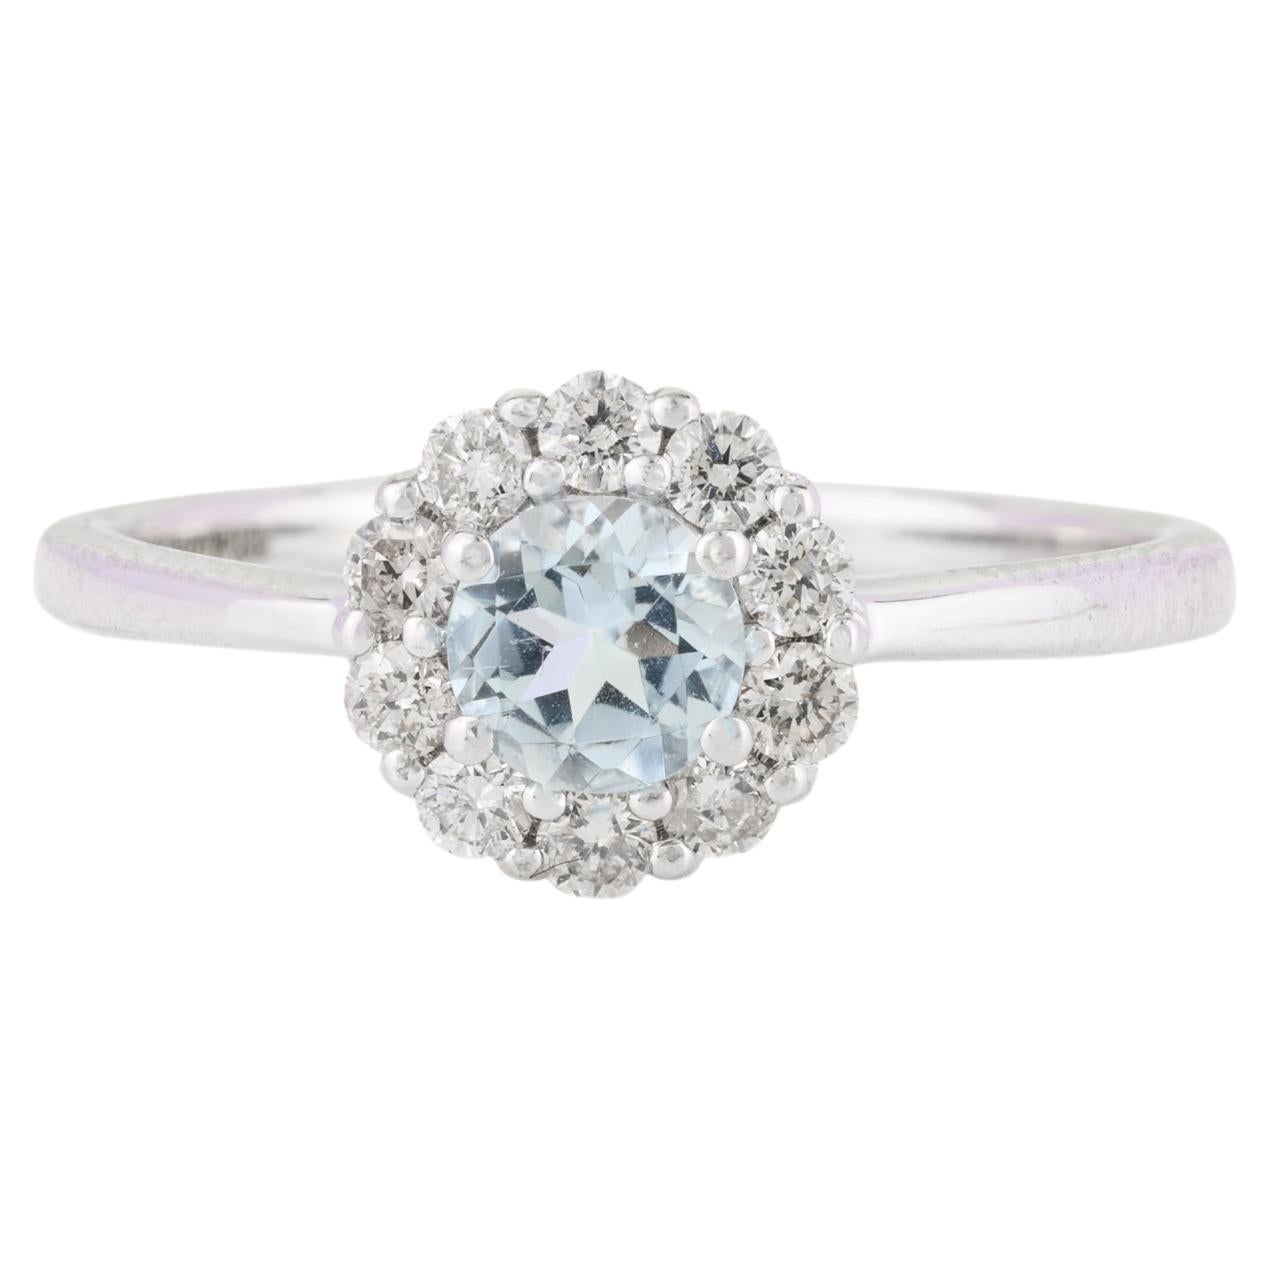 For Sale:  Dainty Aquamarine Halo Diamond Ring Gift for Girlfriend in 14k White Gold